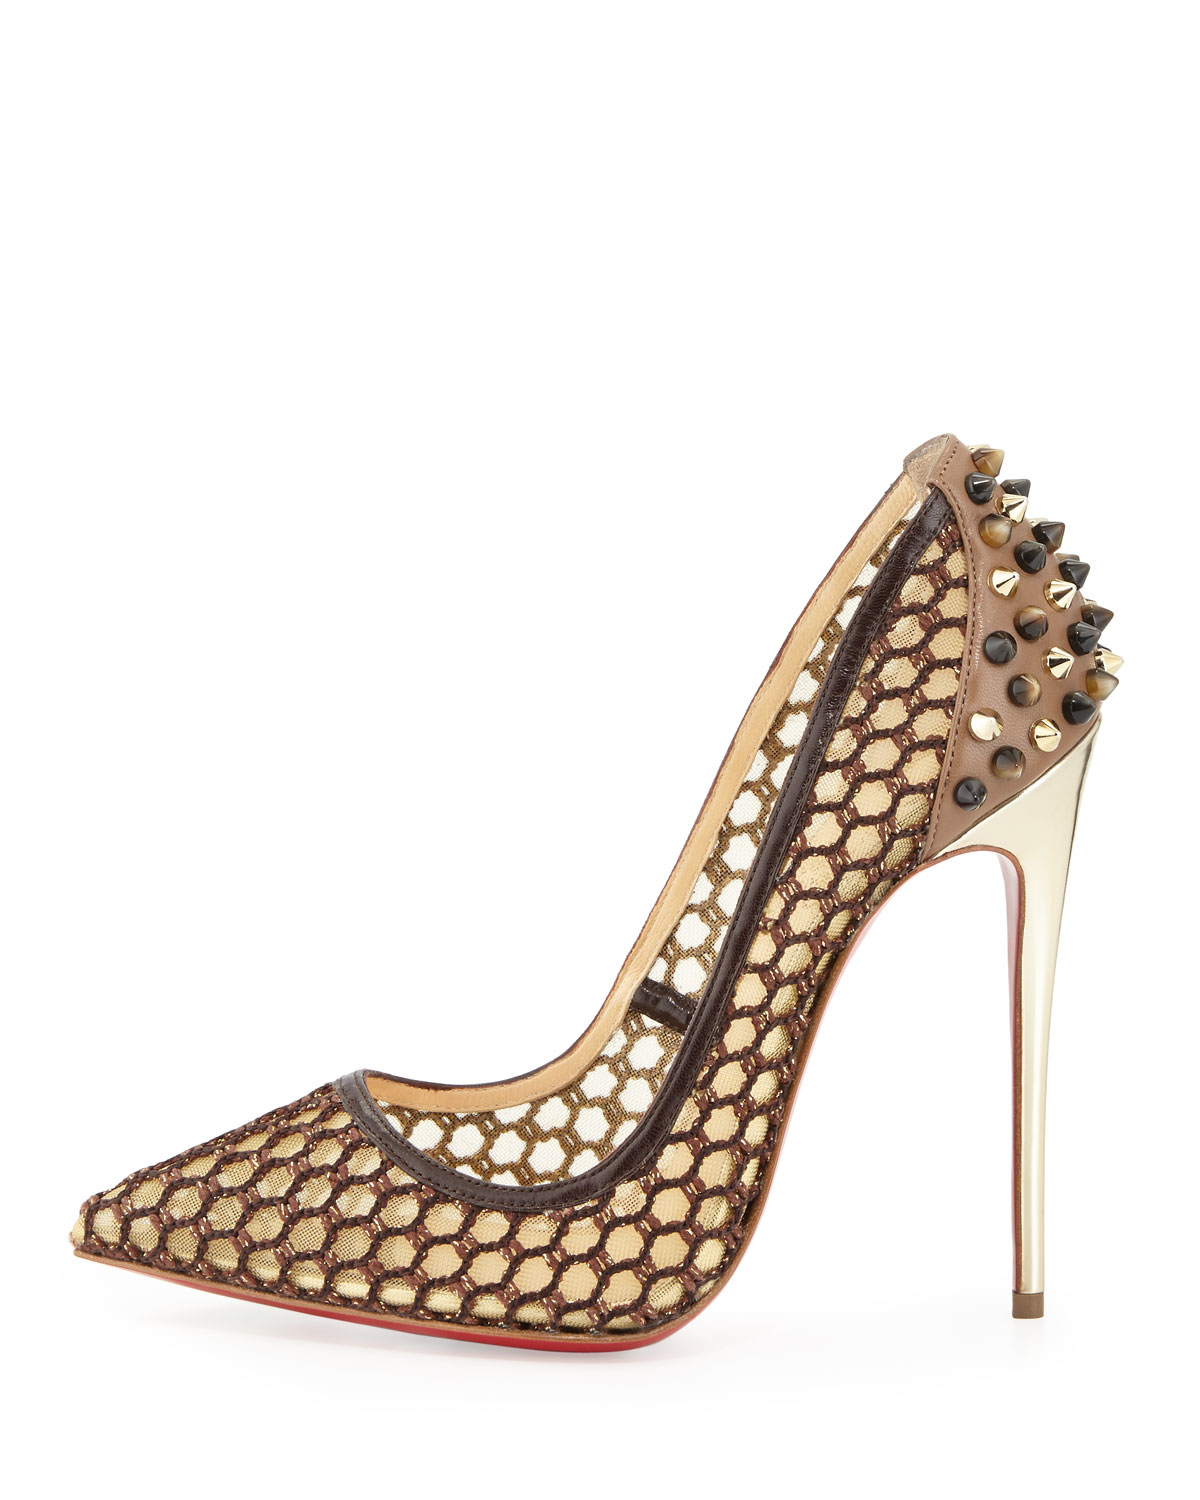 Christian louboutin Guni Knotted 120mm Red Sole Pump in Brown ...  